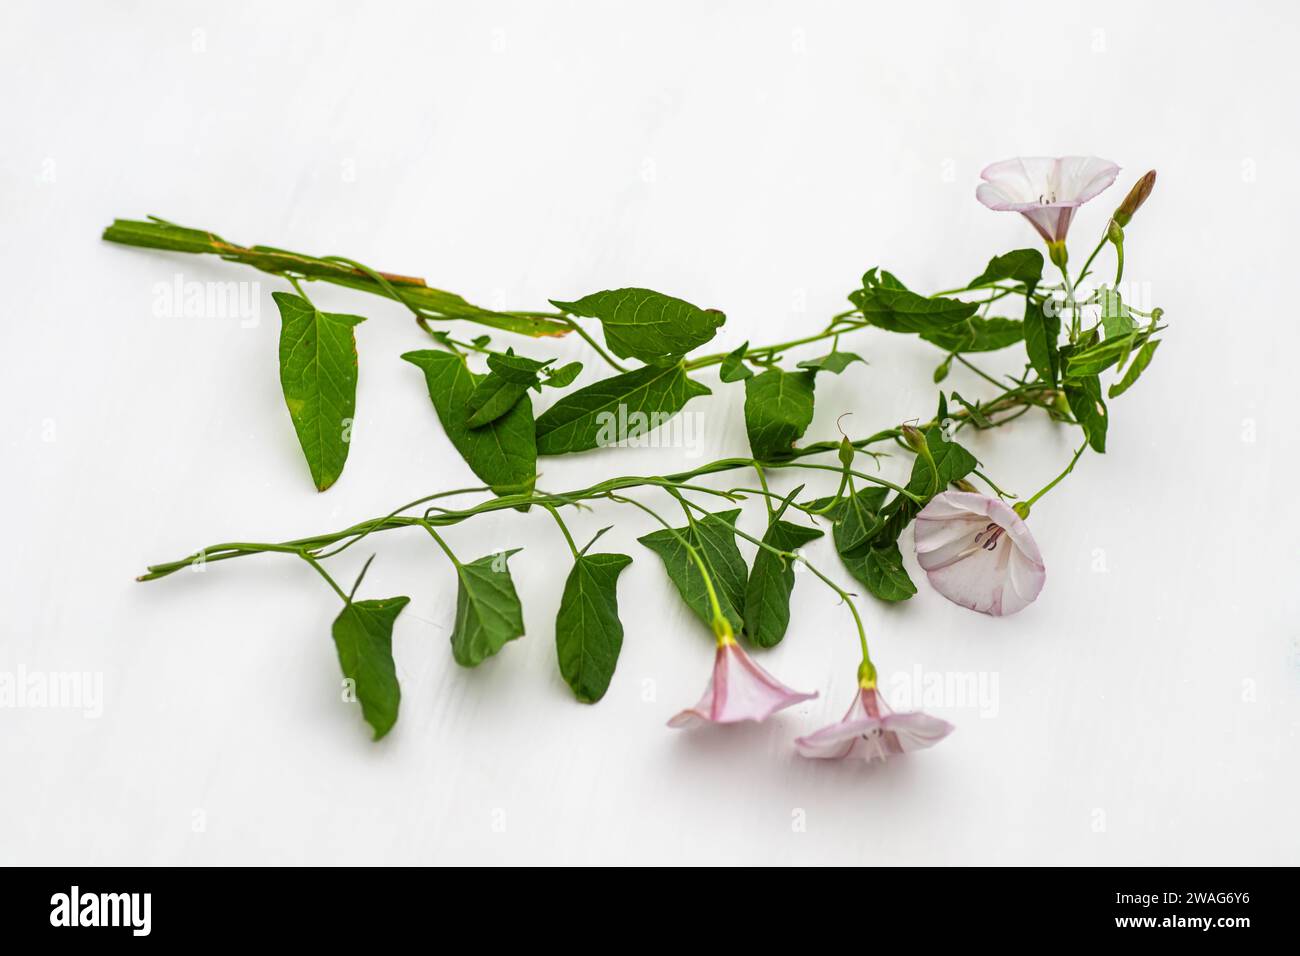 Convolvulus arvensis, or field bindweed with flowers and green leaves on white background during flowering period Stock Photo